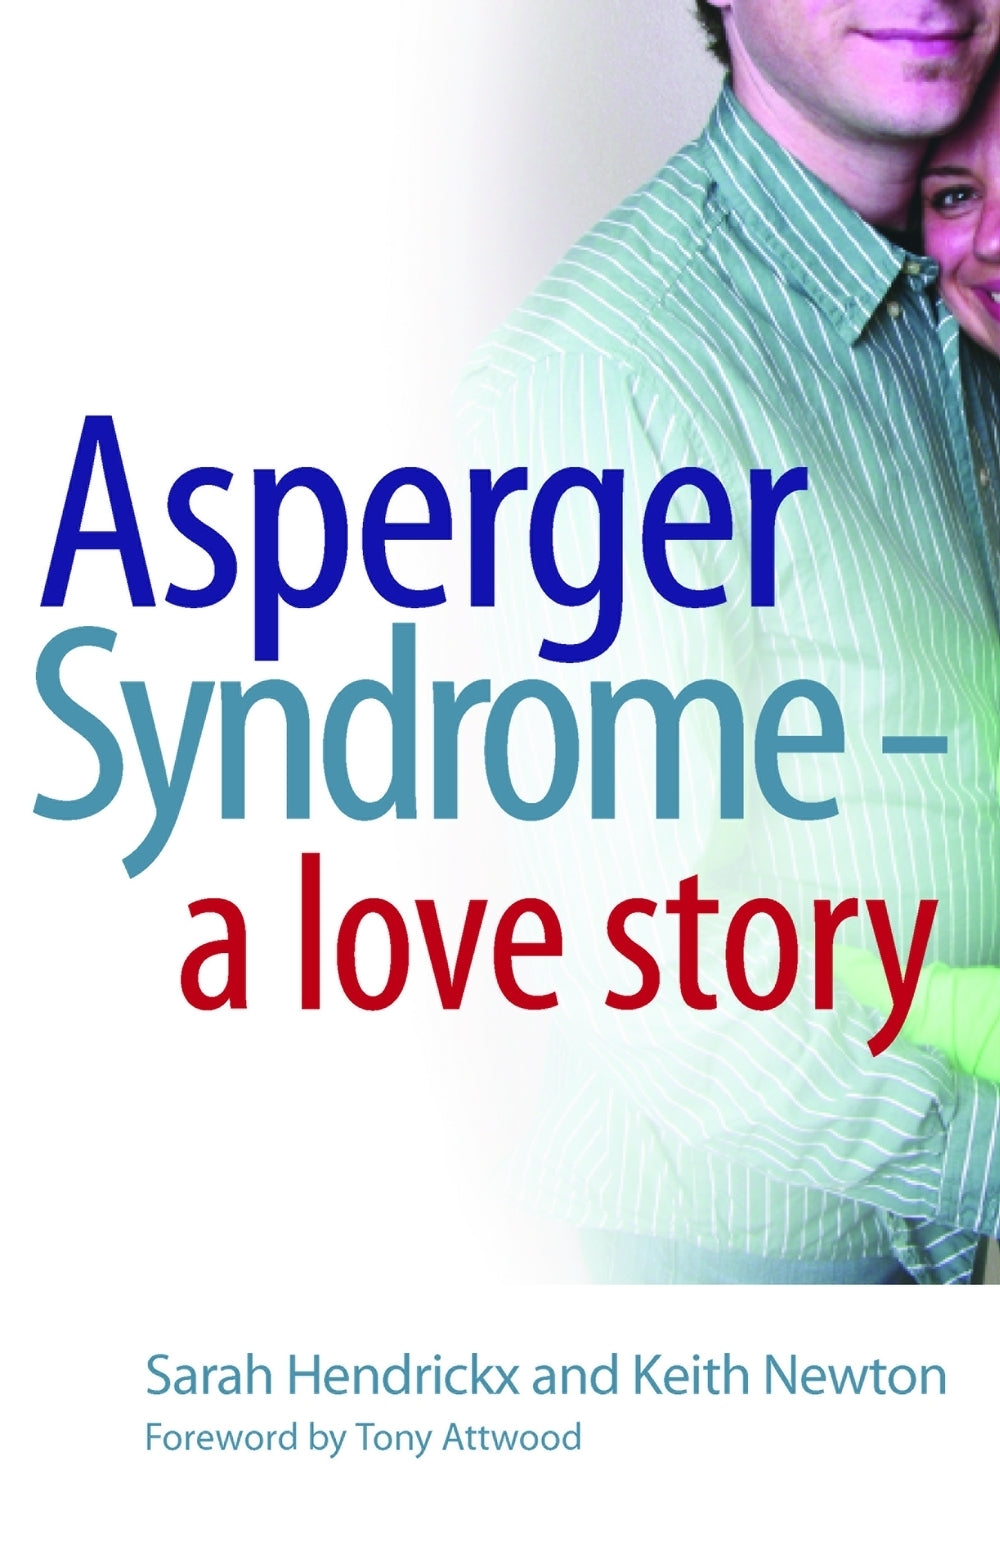 Asperger Syndrome - A Love Story by Dr Anthony Attwood, Sarah Hendrickx, Keith Newton